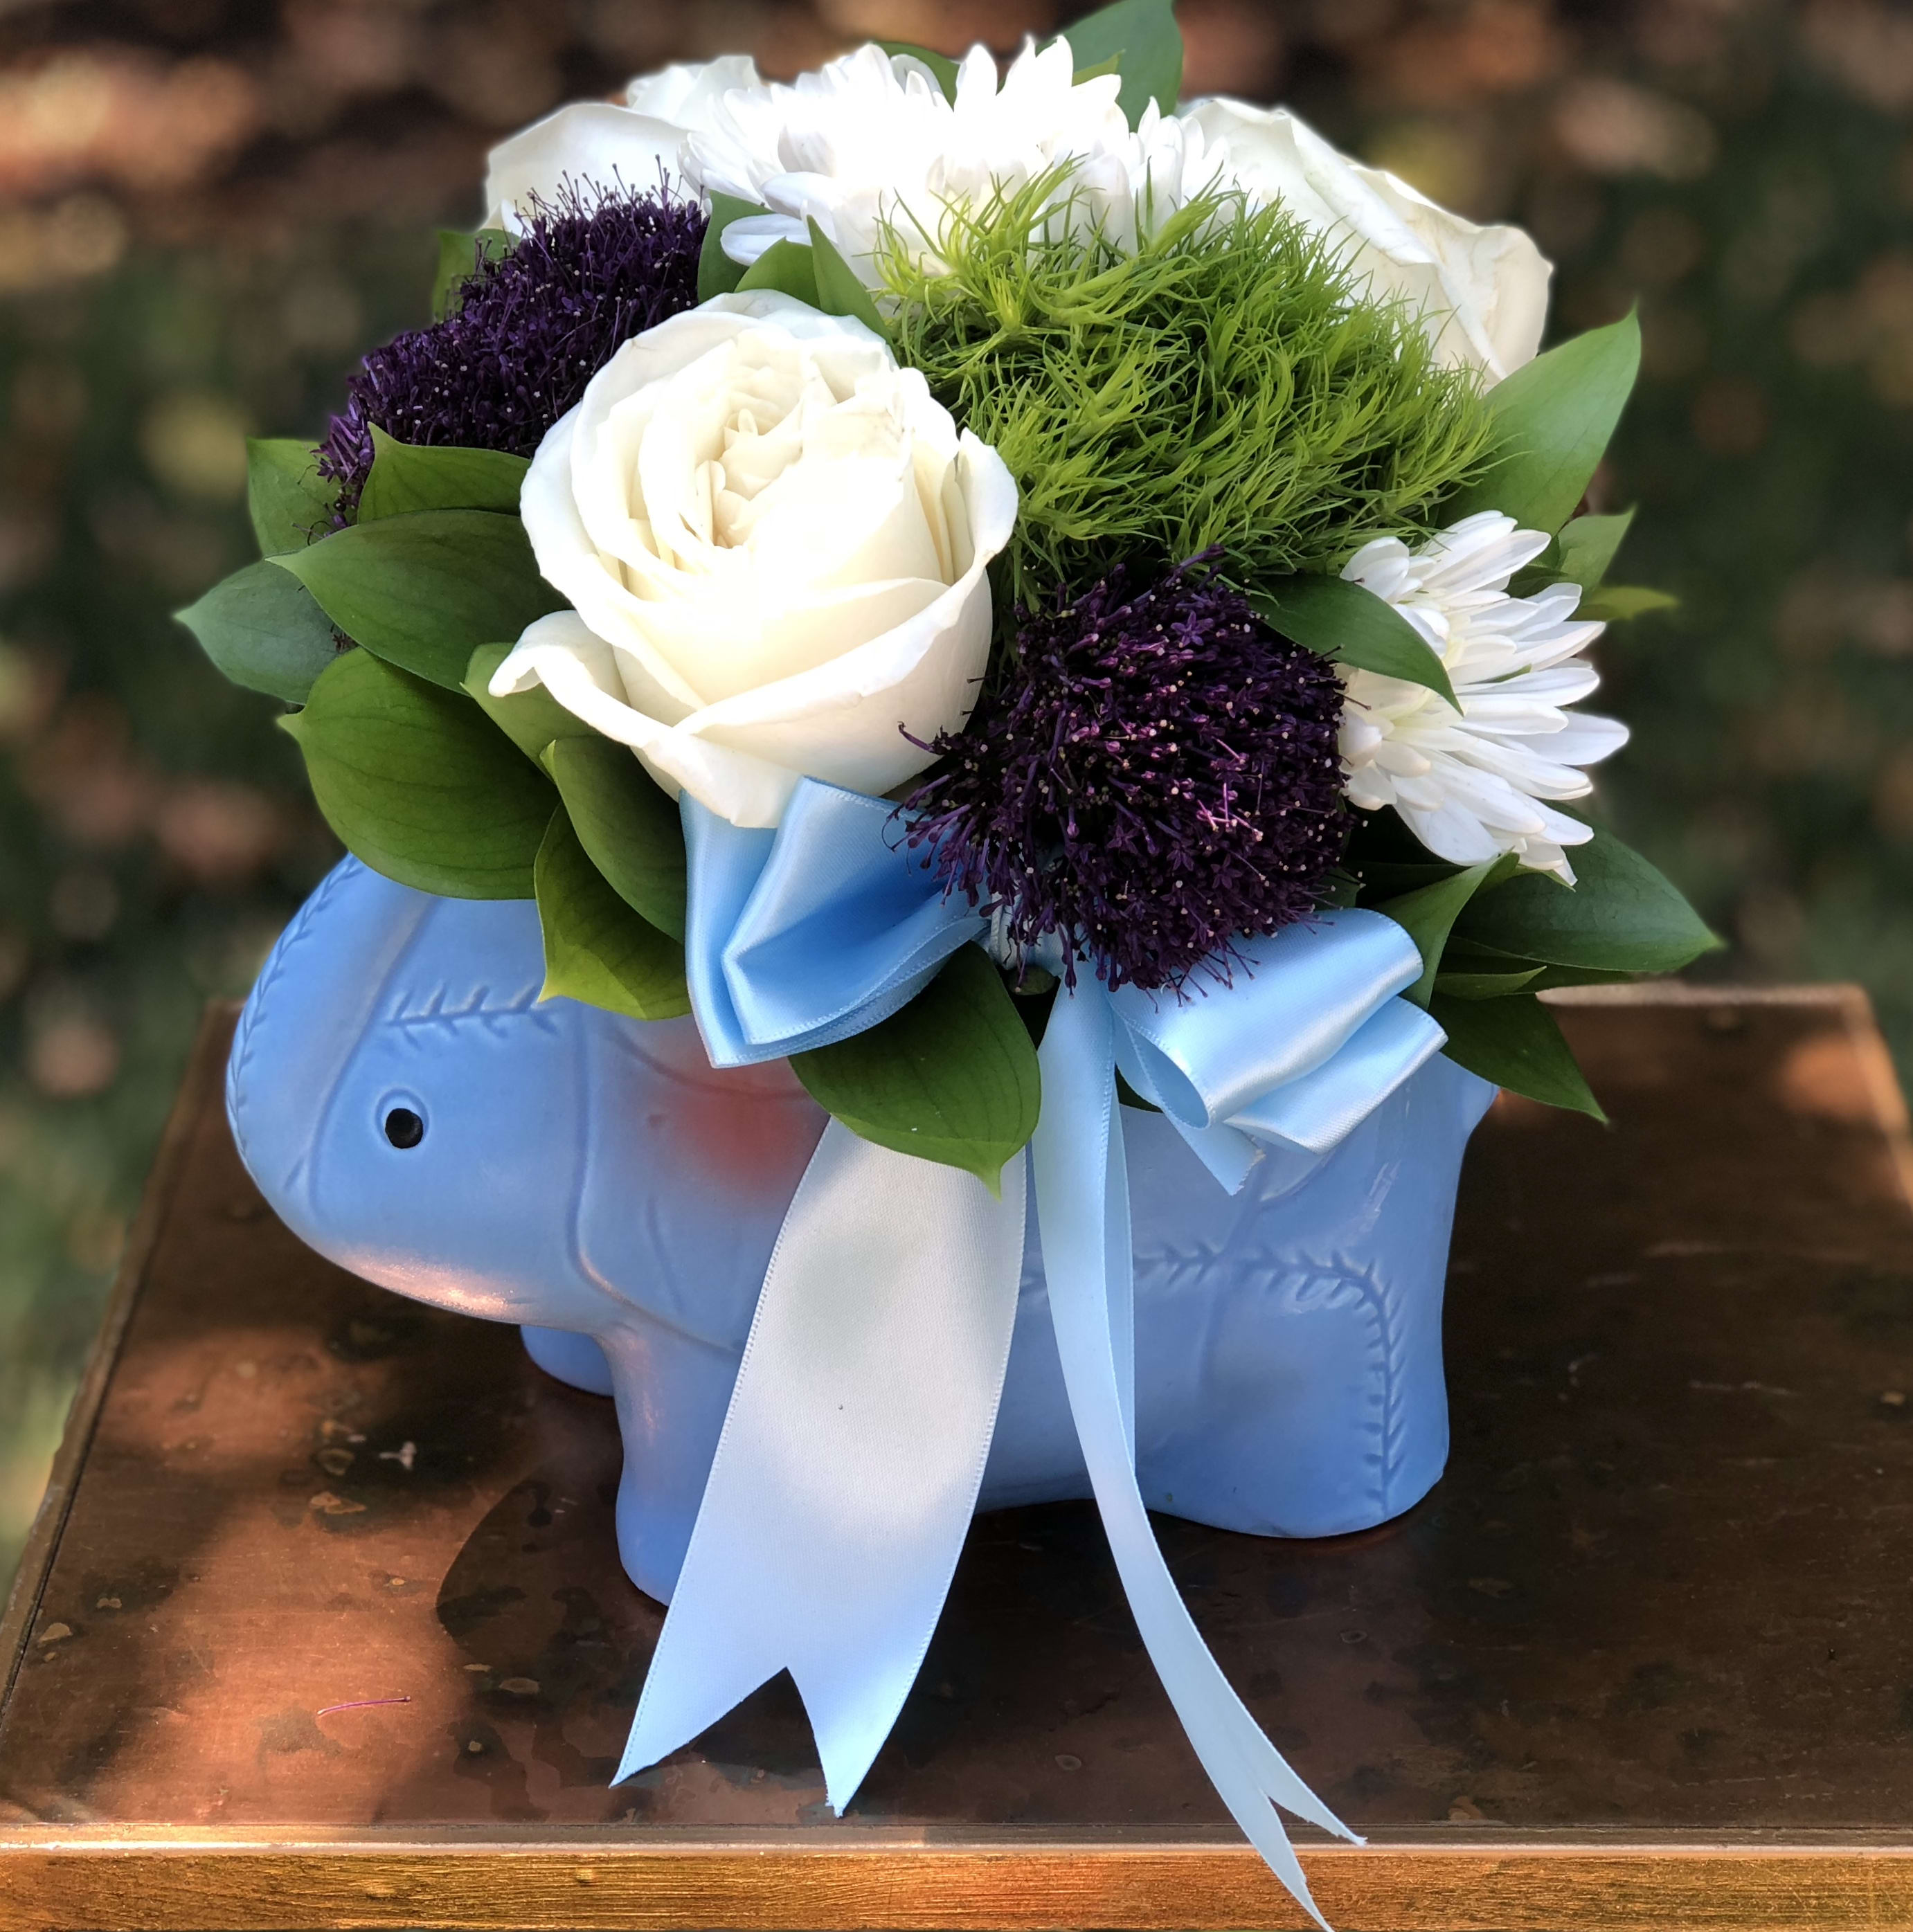 Ellie the Elephant - Adorable blue elephant vase filled white roses, purple trachelium and green dianthus. Sure to brighten any day. Tax free. Same day hand delivery.